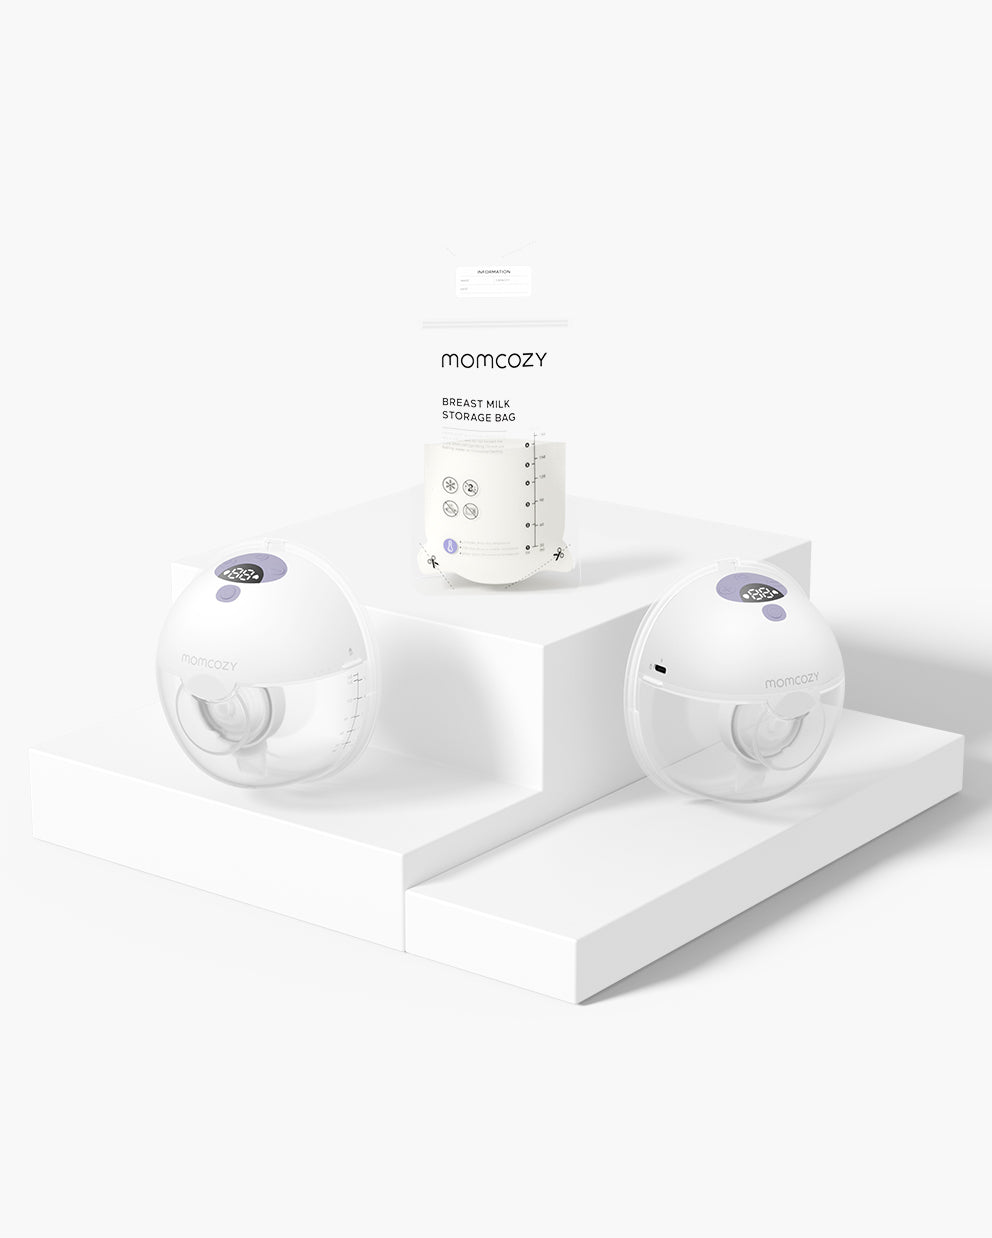 All-in-one M5 Wearable Breast Pump: Convenient & Discreet